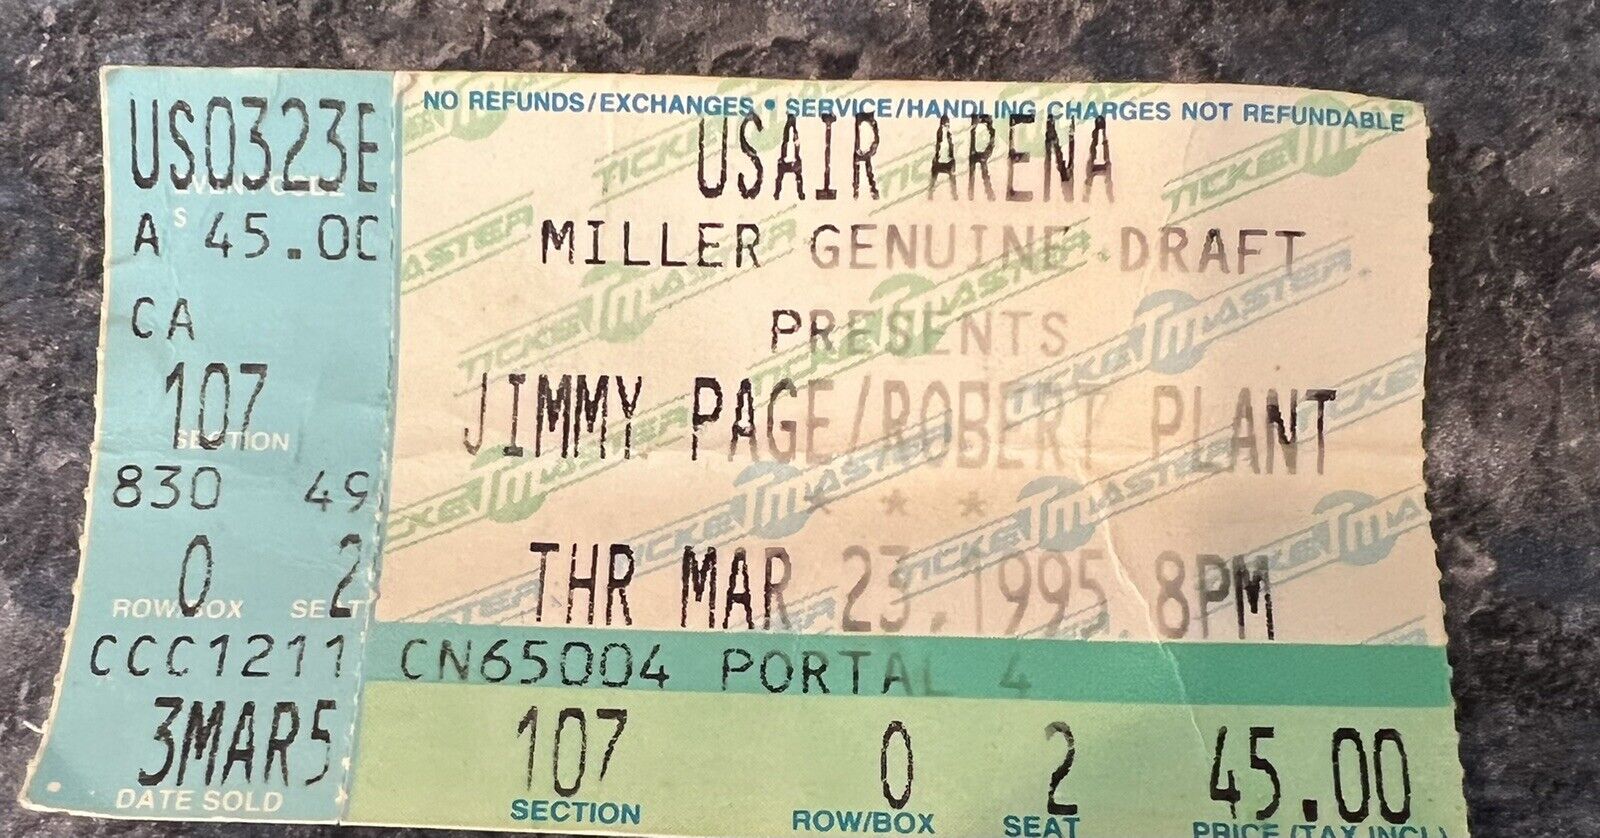 Jimmy Page and Robert Plant ticket stub 1995 tour